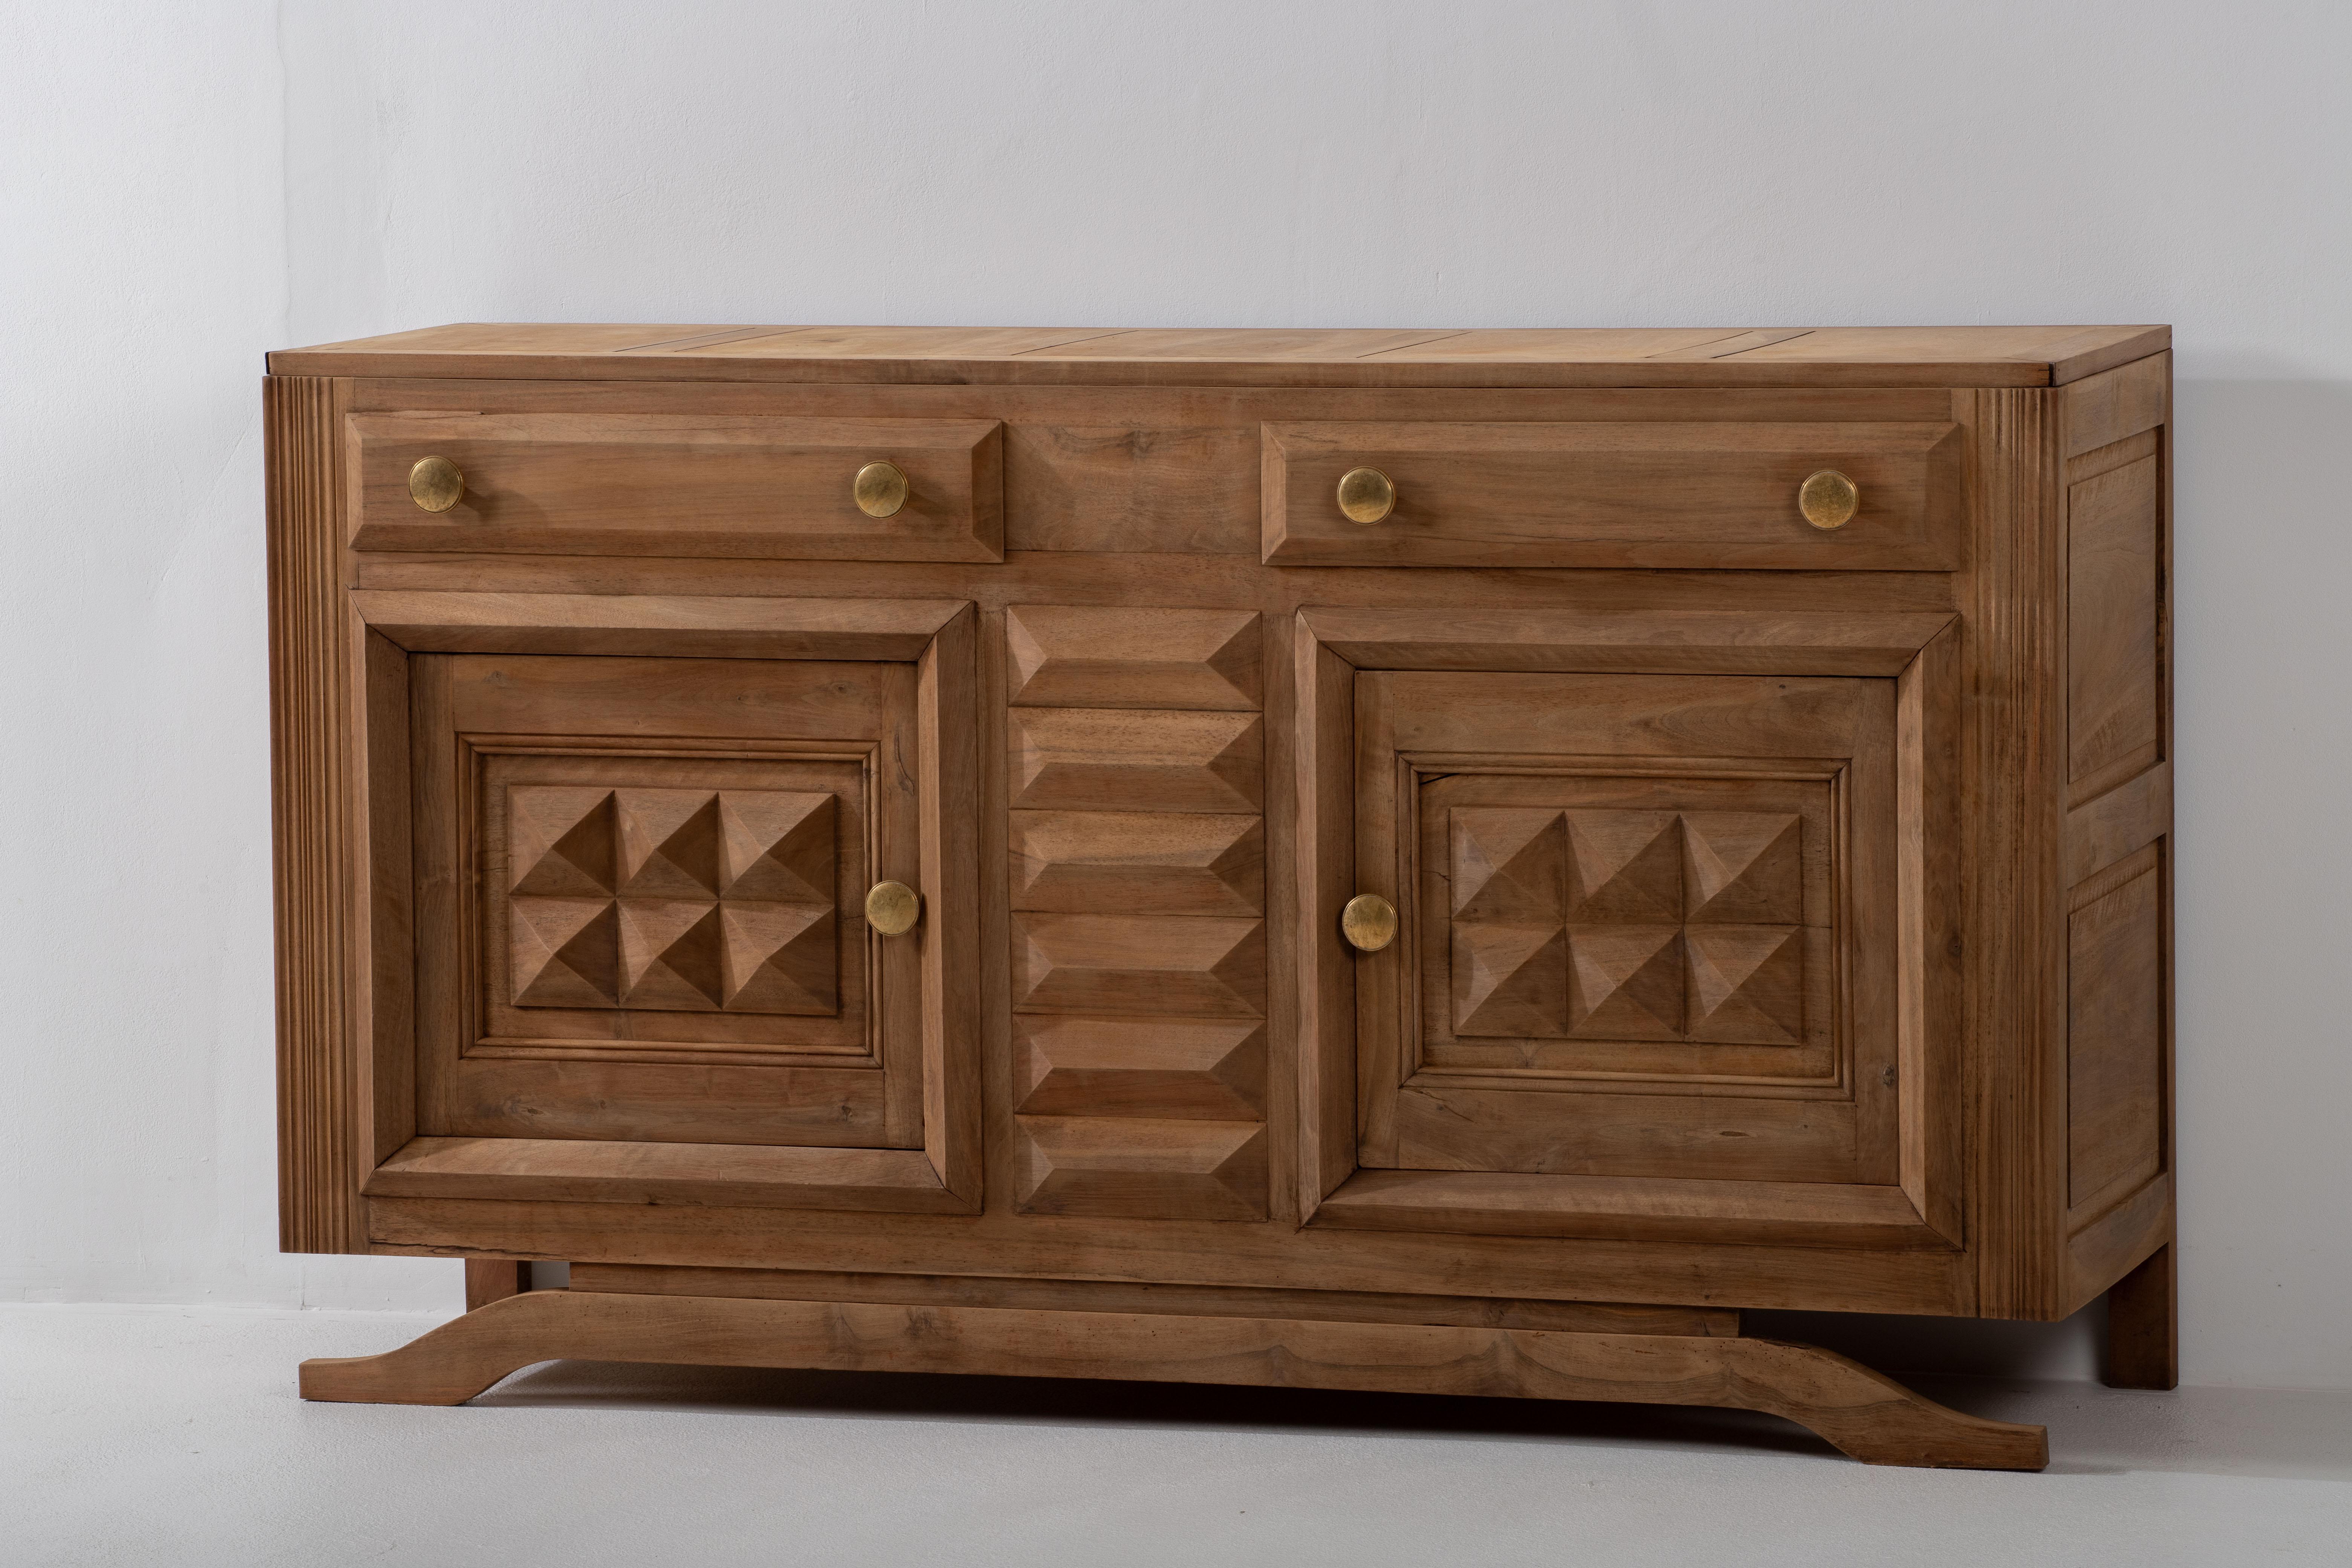 Presenting an exquisite credenza meticulously crafted from rich oak, echoing the artistic spirit of the 1940s. This Art Deco Brutalist sideboard features a symmetrical design with drawers thoughtfully positioned in the center. The piece offers two